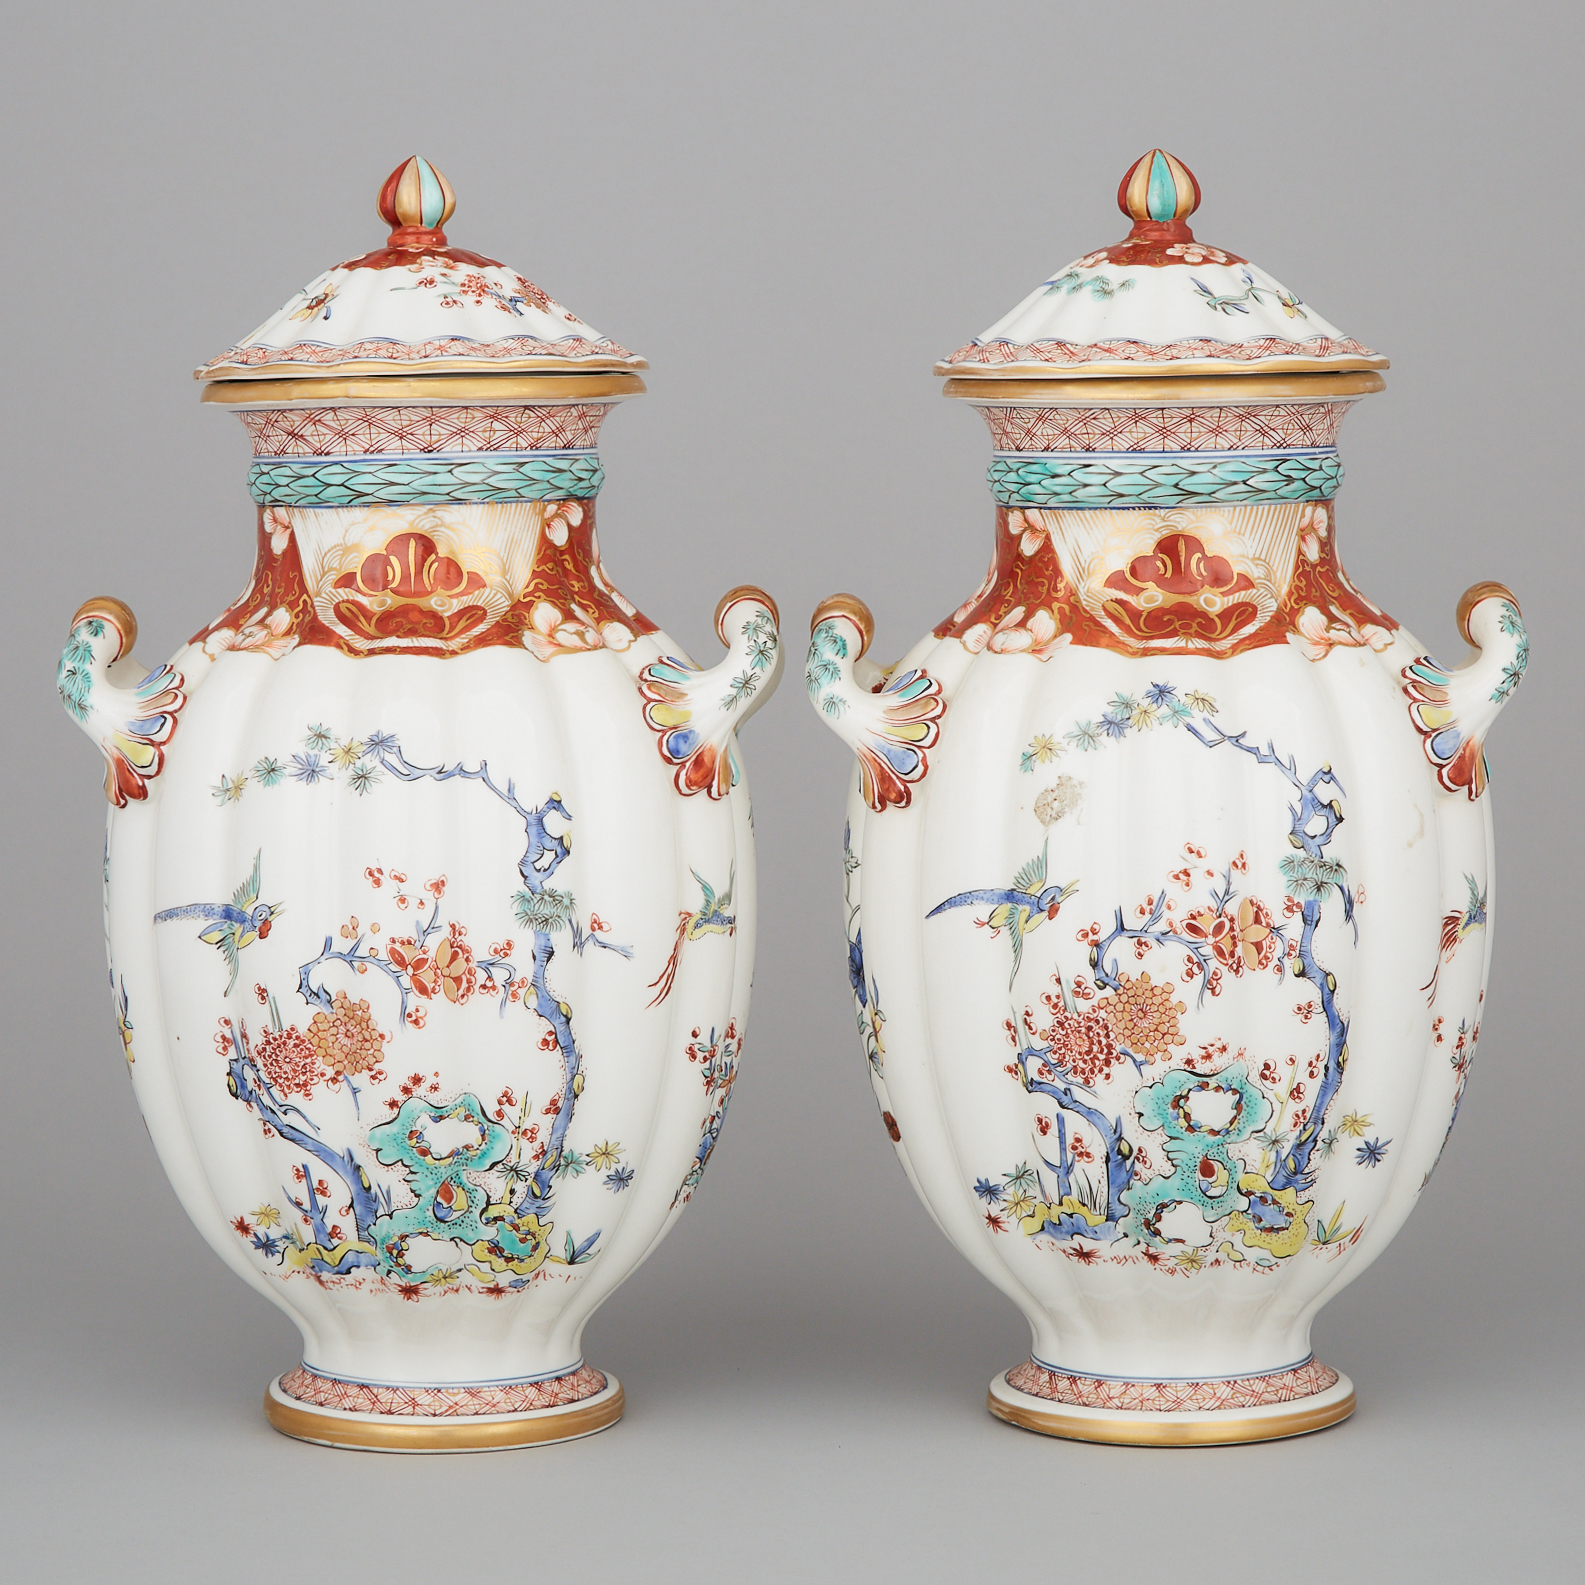 Pair of Samson Kakiemon Two-Handled Vases and Covers, c.1900